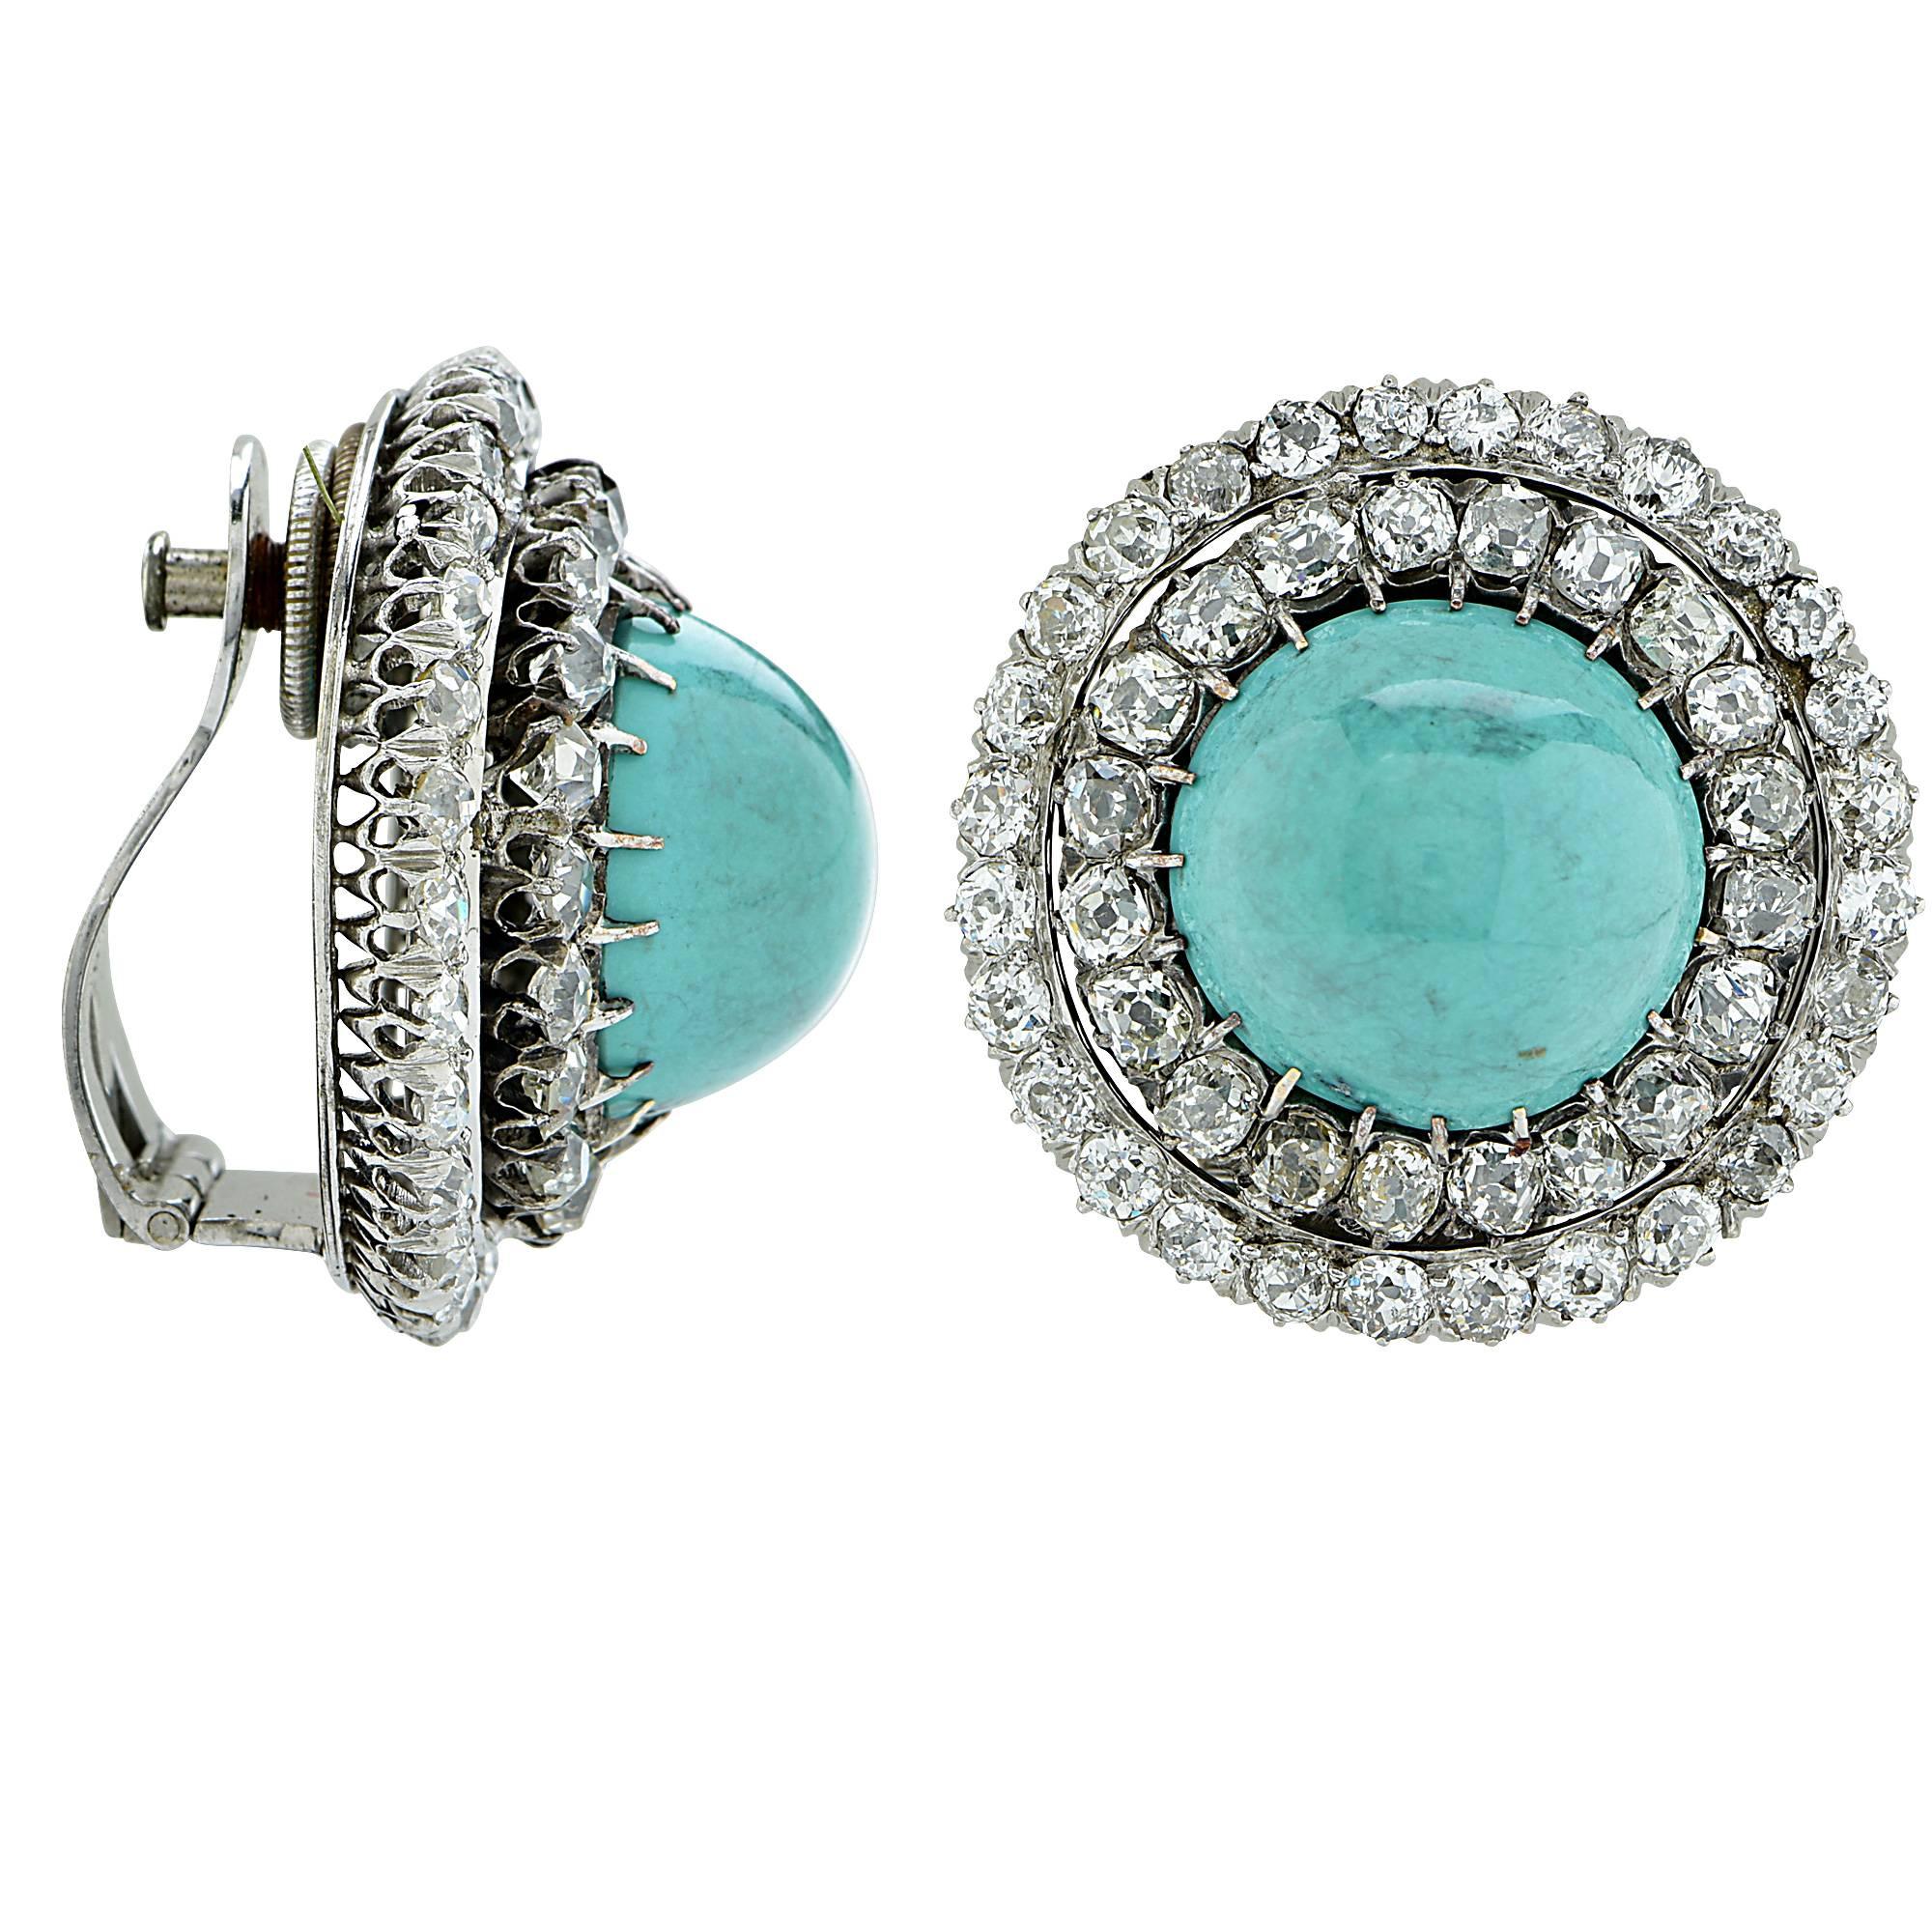 9k white gold earrings containing 2 high dome turquoise cabochons surround by 110 old European and mine cut diamonds weighing approximately 8cts. 

Metal weight: 23.94 grams

These diamond and turquoise earrings are accompanied by a retail appraisal